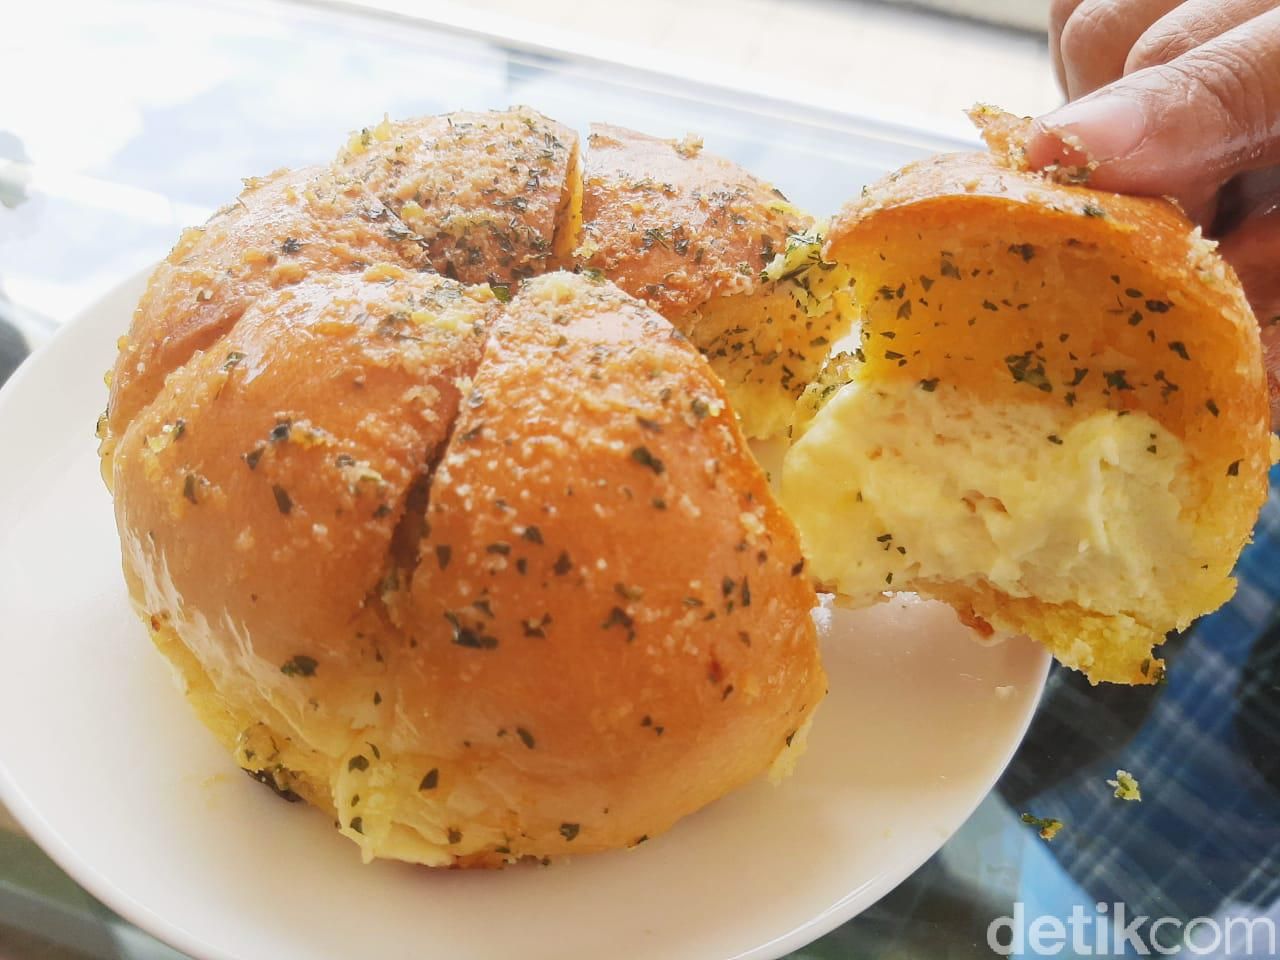 Review Battle 3 Korean Garlic Cheese Bread; Super Furry, Sweet Troops, Odelice Indonesia